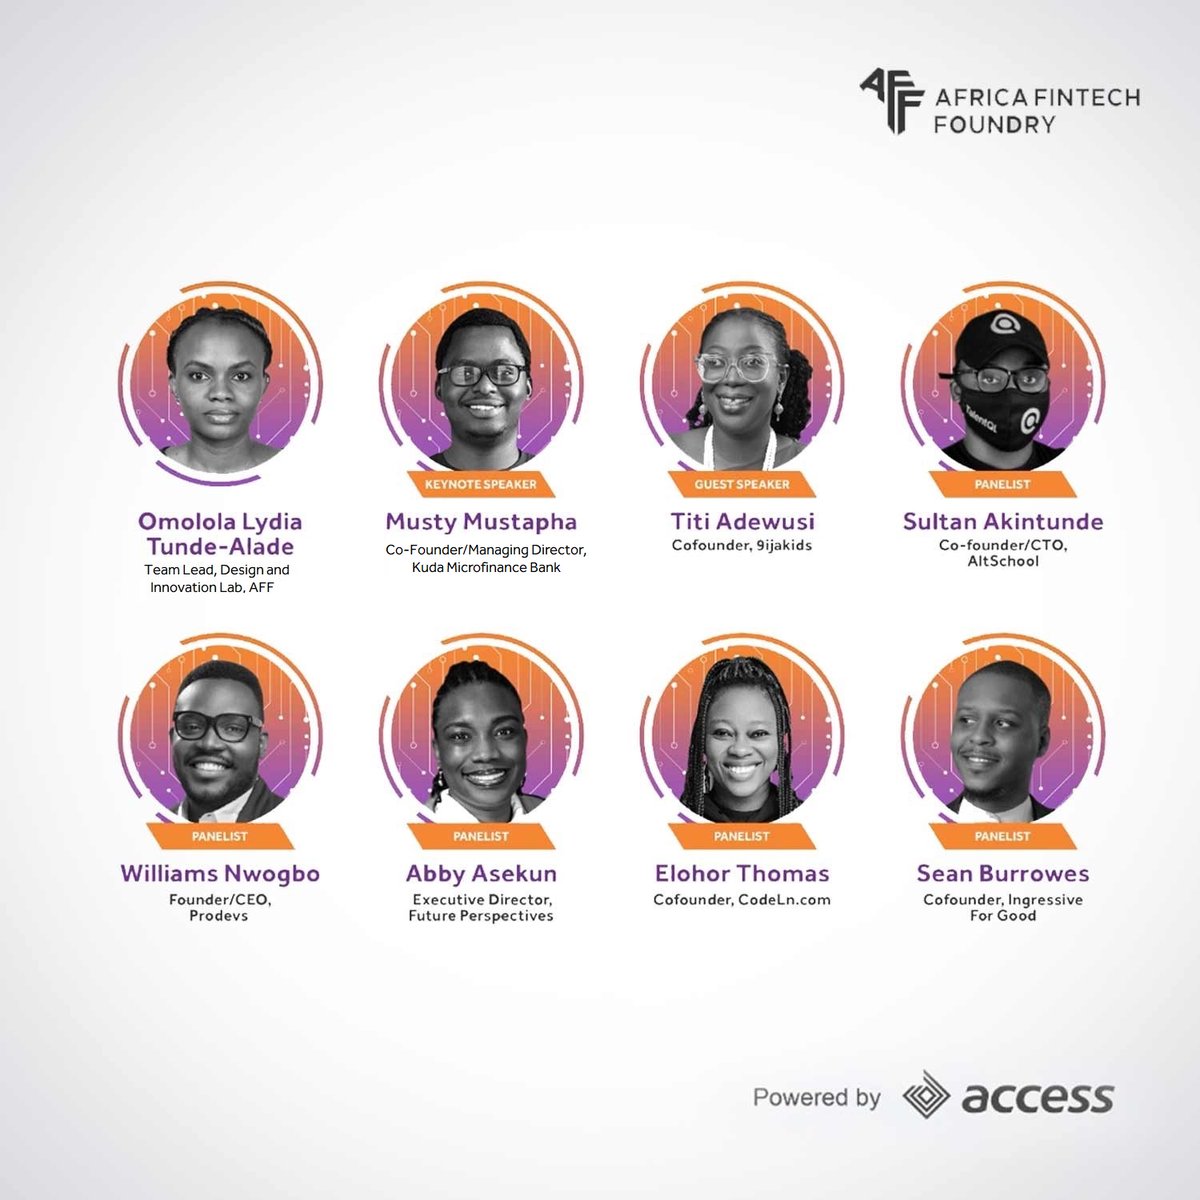 It’s 4 DAYS to the AFF Roundtable Talk 5.0! 

Don’t miss the chance to gain valuable insights that can help you advance your tech skills and knowledge.

Register now to secure your spot: africantechfoundry.com

#AFFRoundtableTalk5 #AfricanTechFoundry